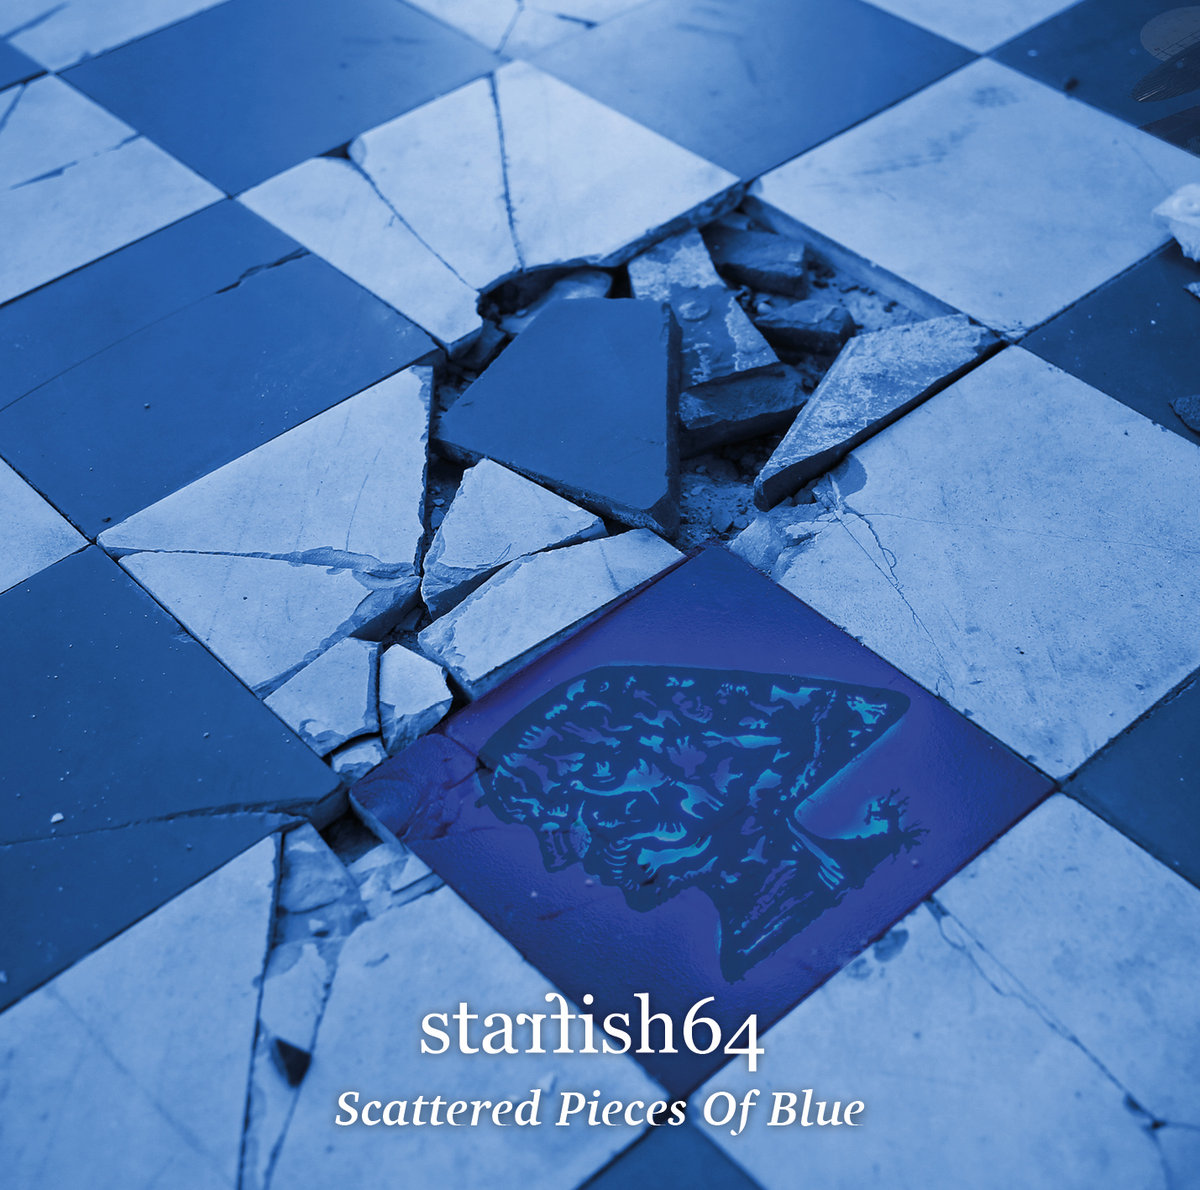 Starfish64: Scattered Pieces of Blue